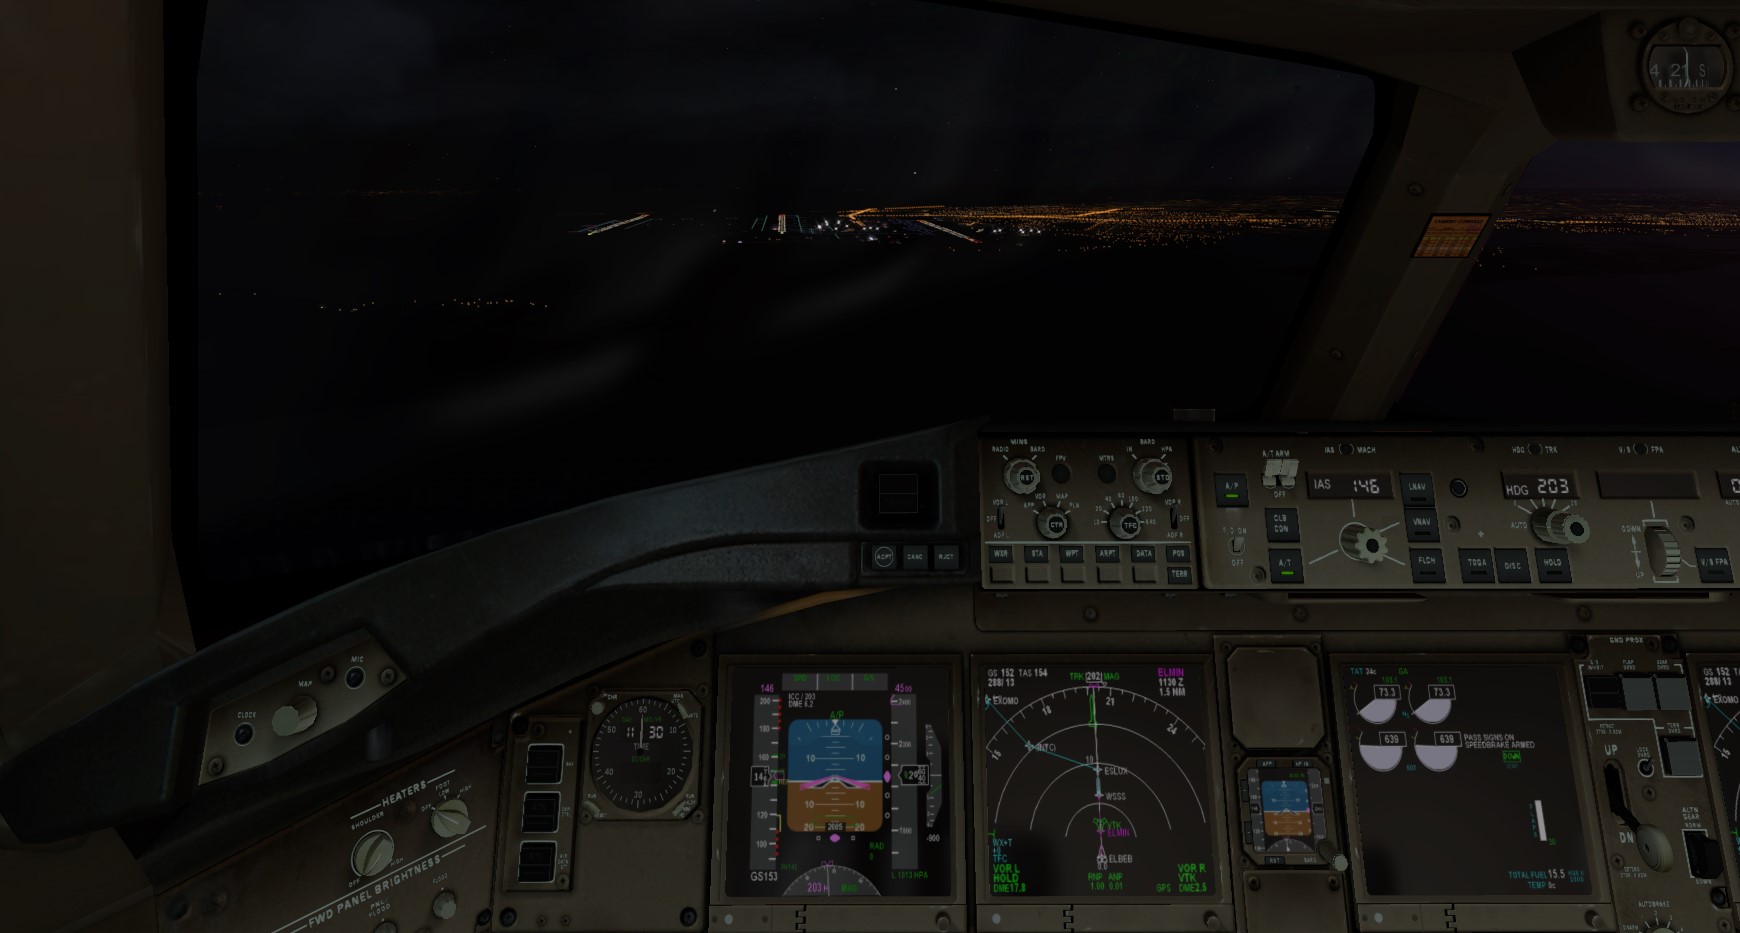 On final at Singapore